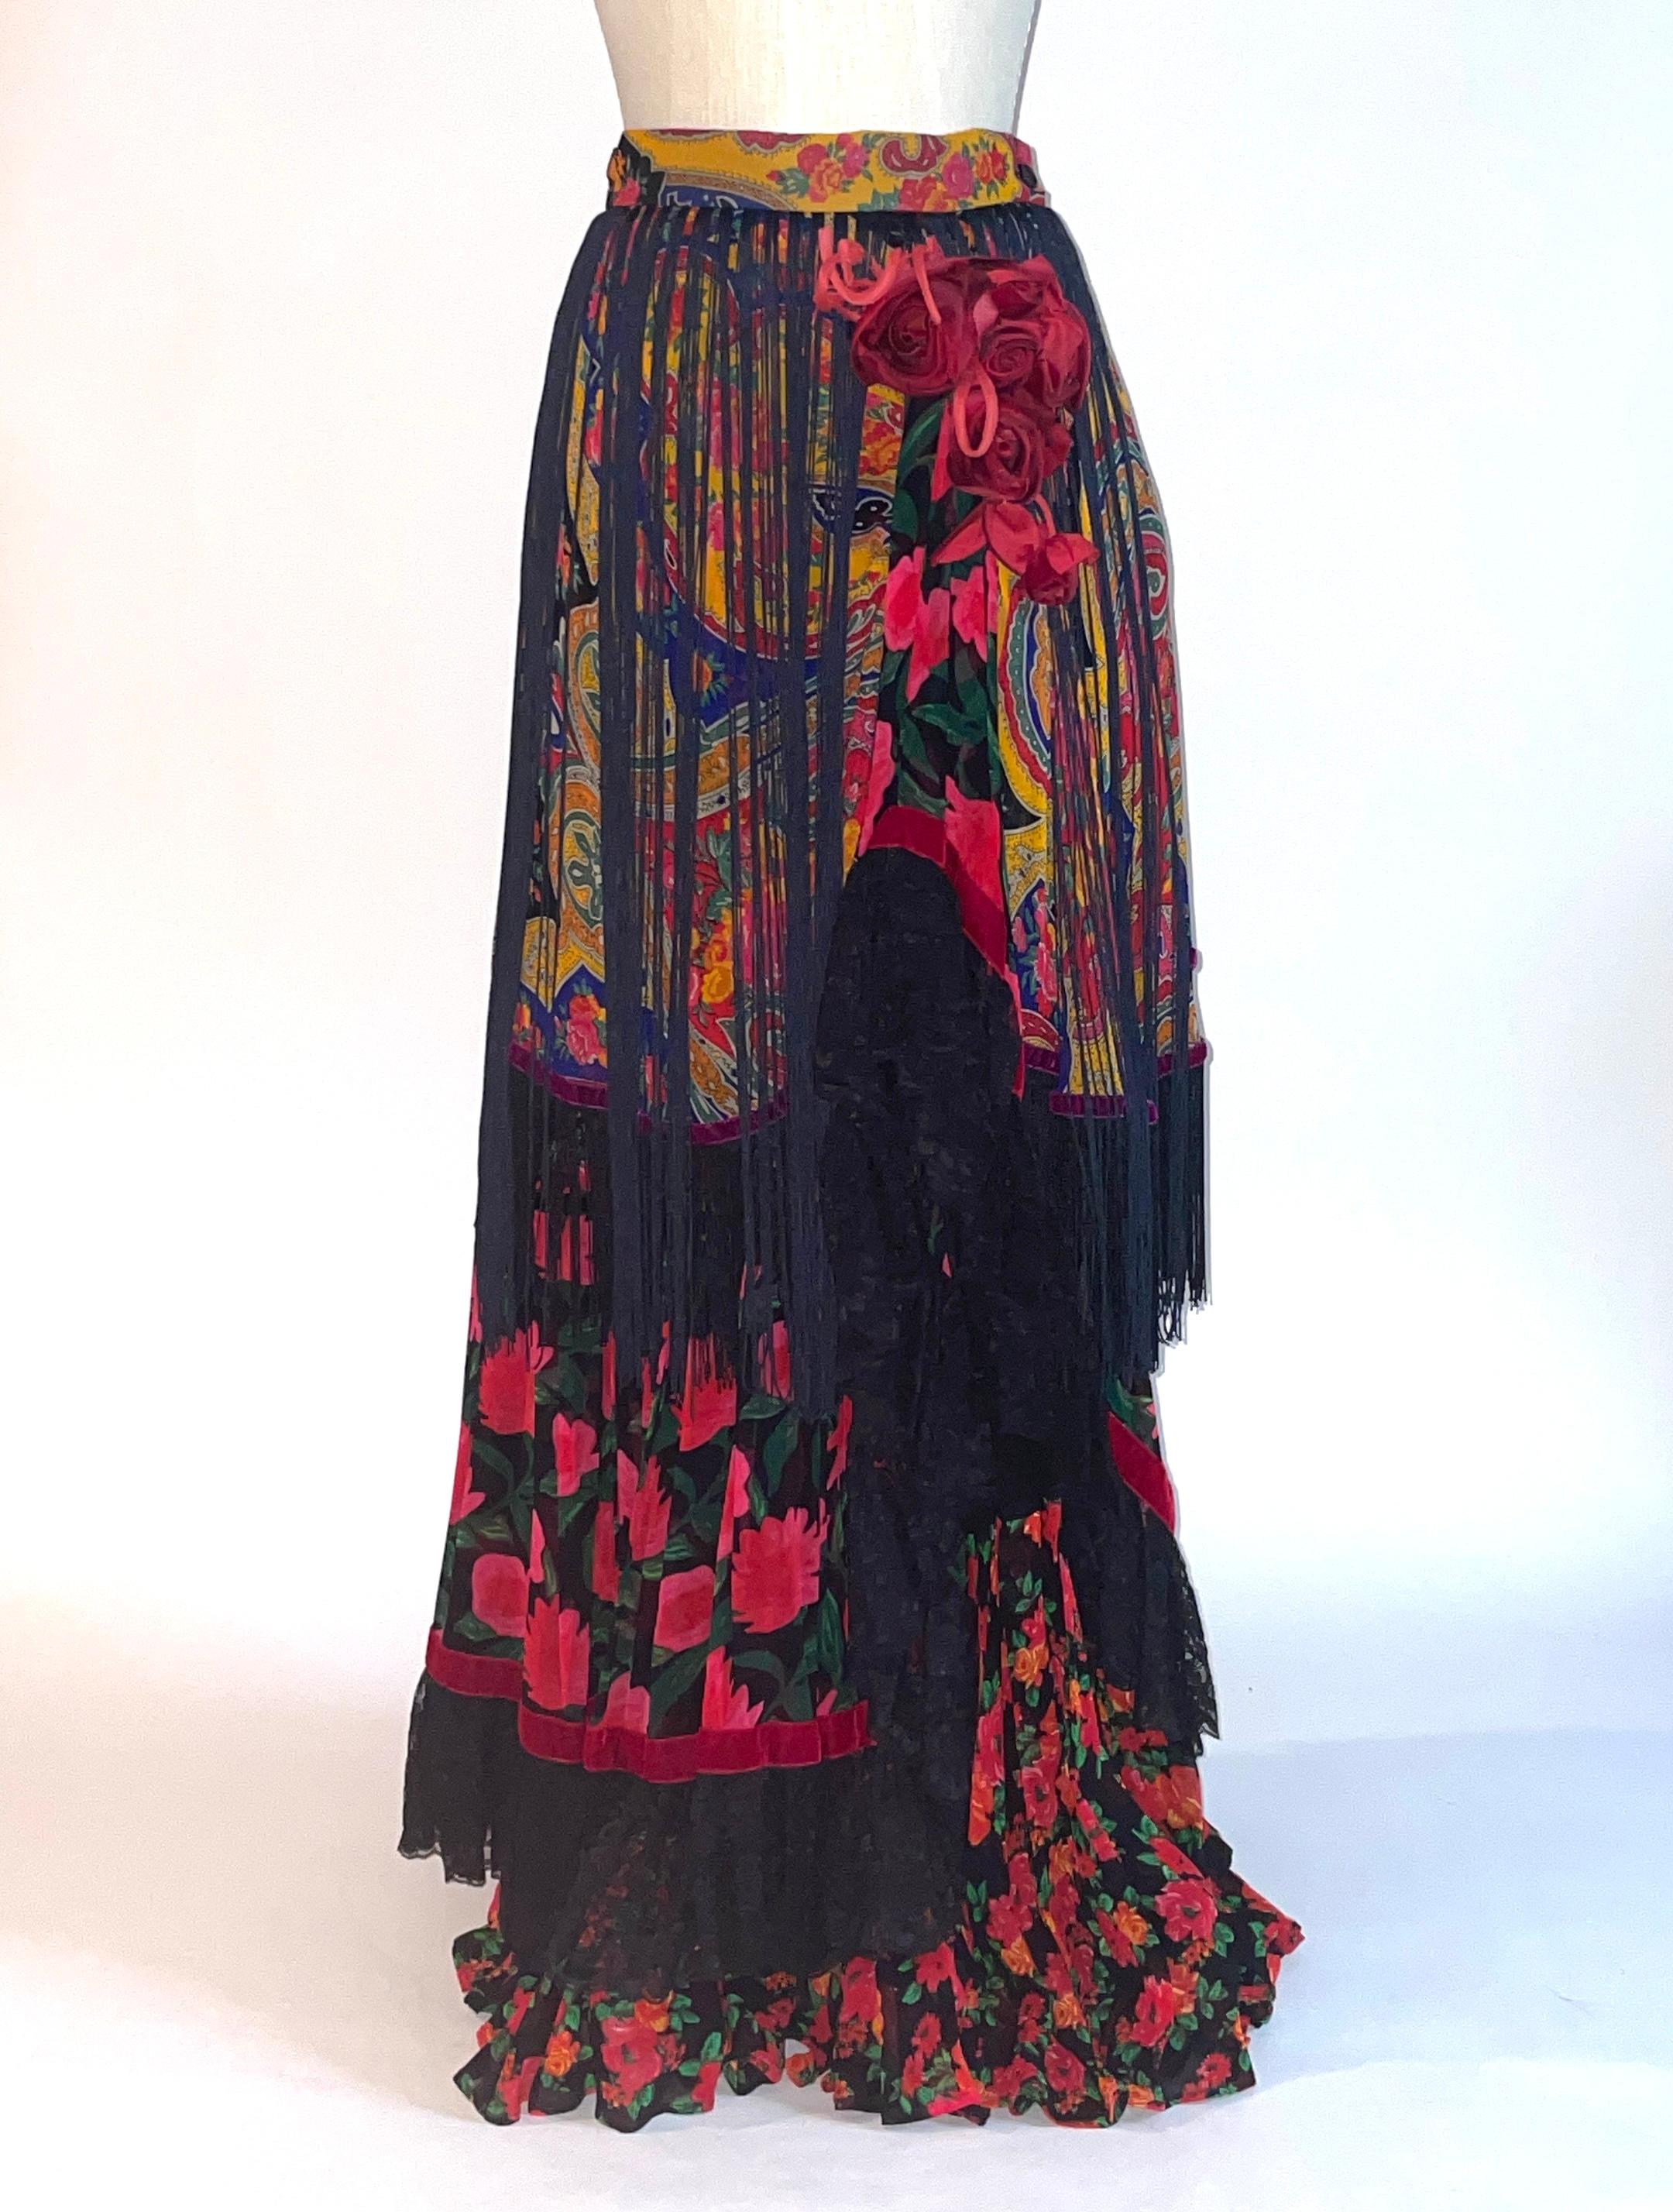 Vintage Dolce and Gabbana (circa 1990s) tiered skirt with tiered layers of floral and paisley. One tier is trimmed in lace, while another is trimmed in fringe. Additional long trim hangs from waist, and a red rose embellishment is placed at side